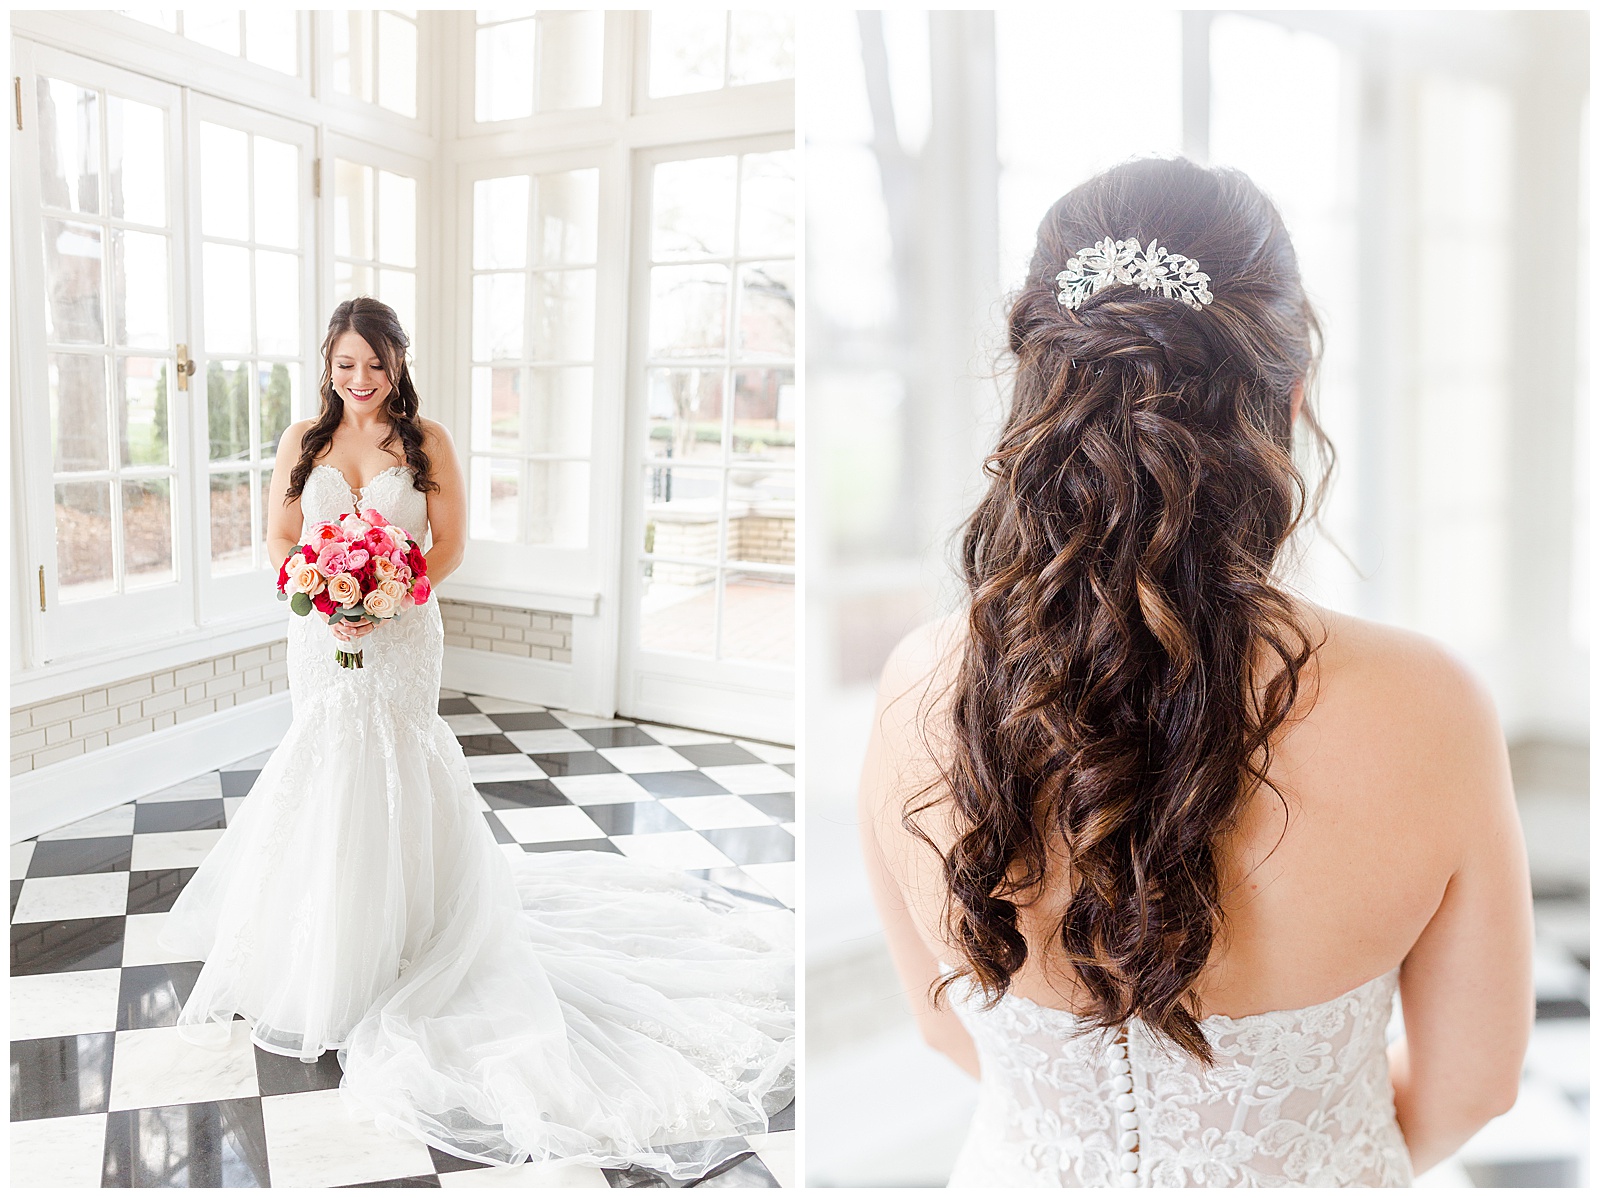 Long Brown Curly Bride Hair Ideas from Light and Airy Outdoor Wedding at Separk Mansion in Gastonia, NC | Kevyn Dixon Photography